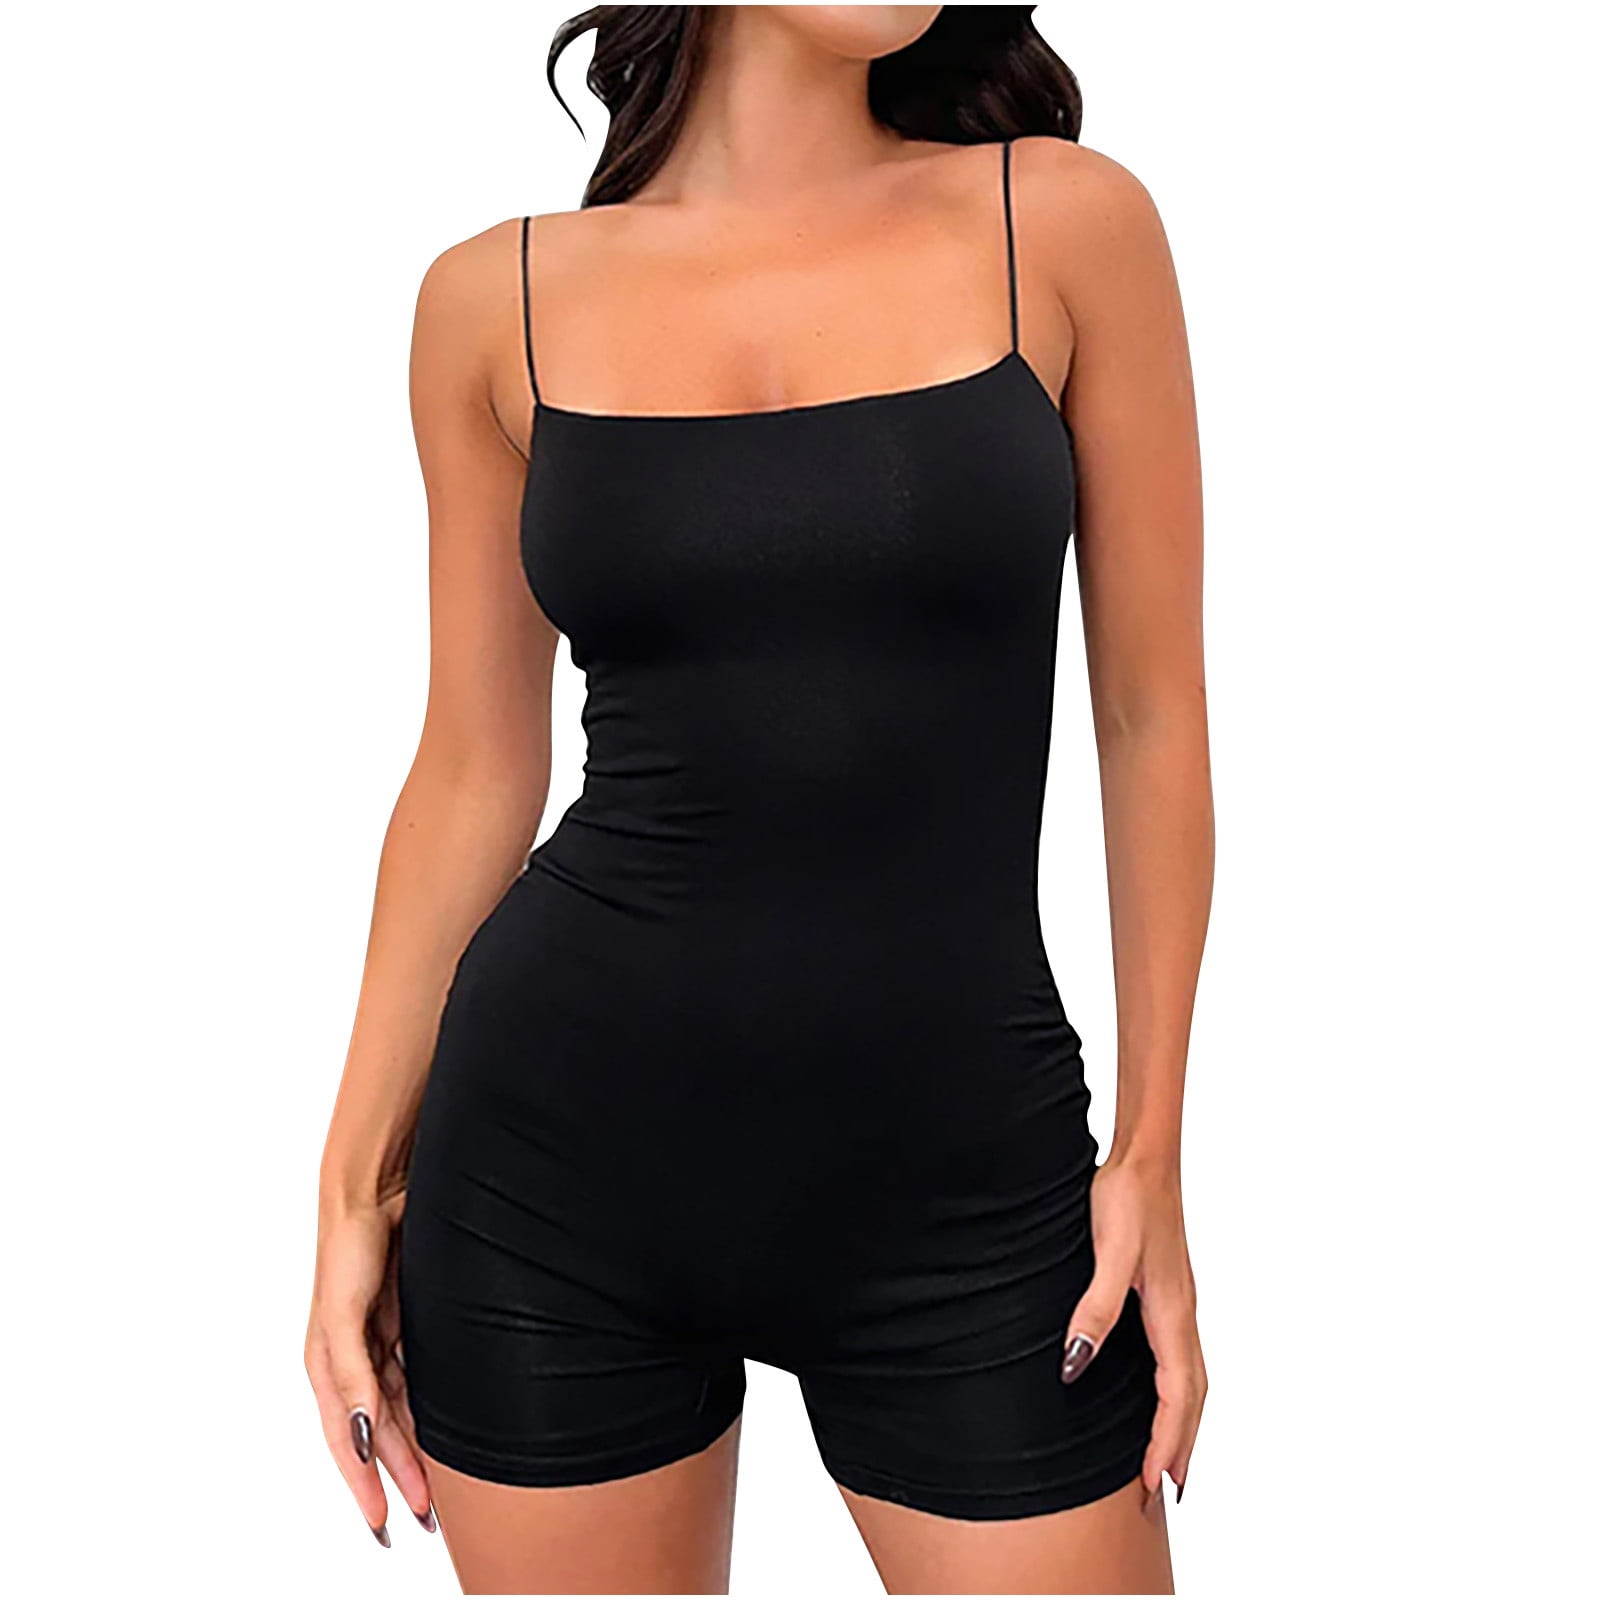 amelAEA Athletic Rompers for Women Casual Spaghetti Strap Romper Summer  Outfits Gym Shorts Jumpsuits